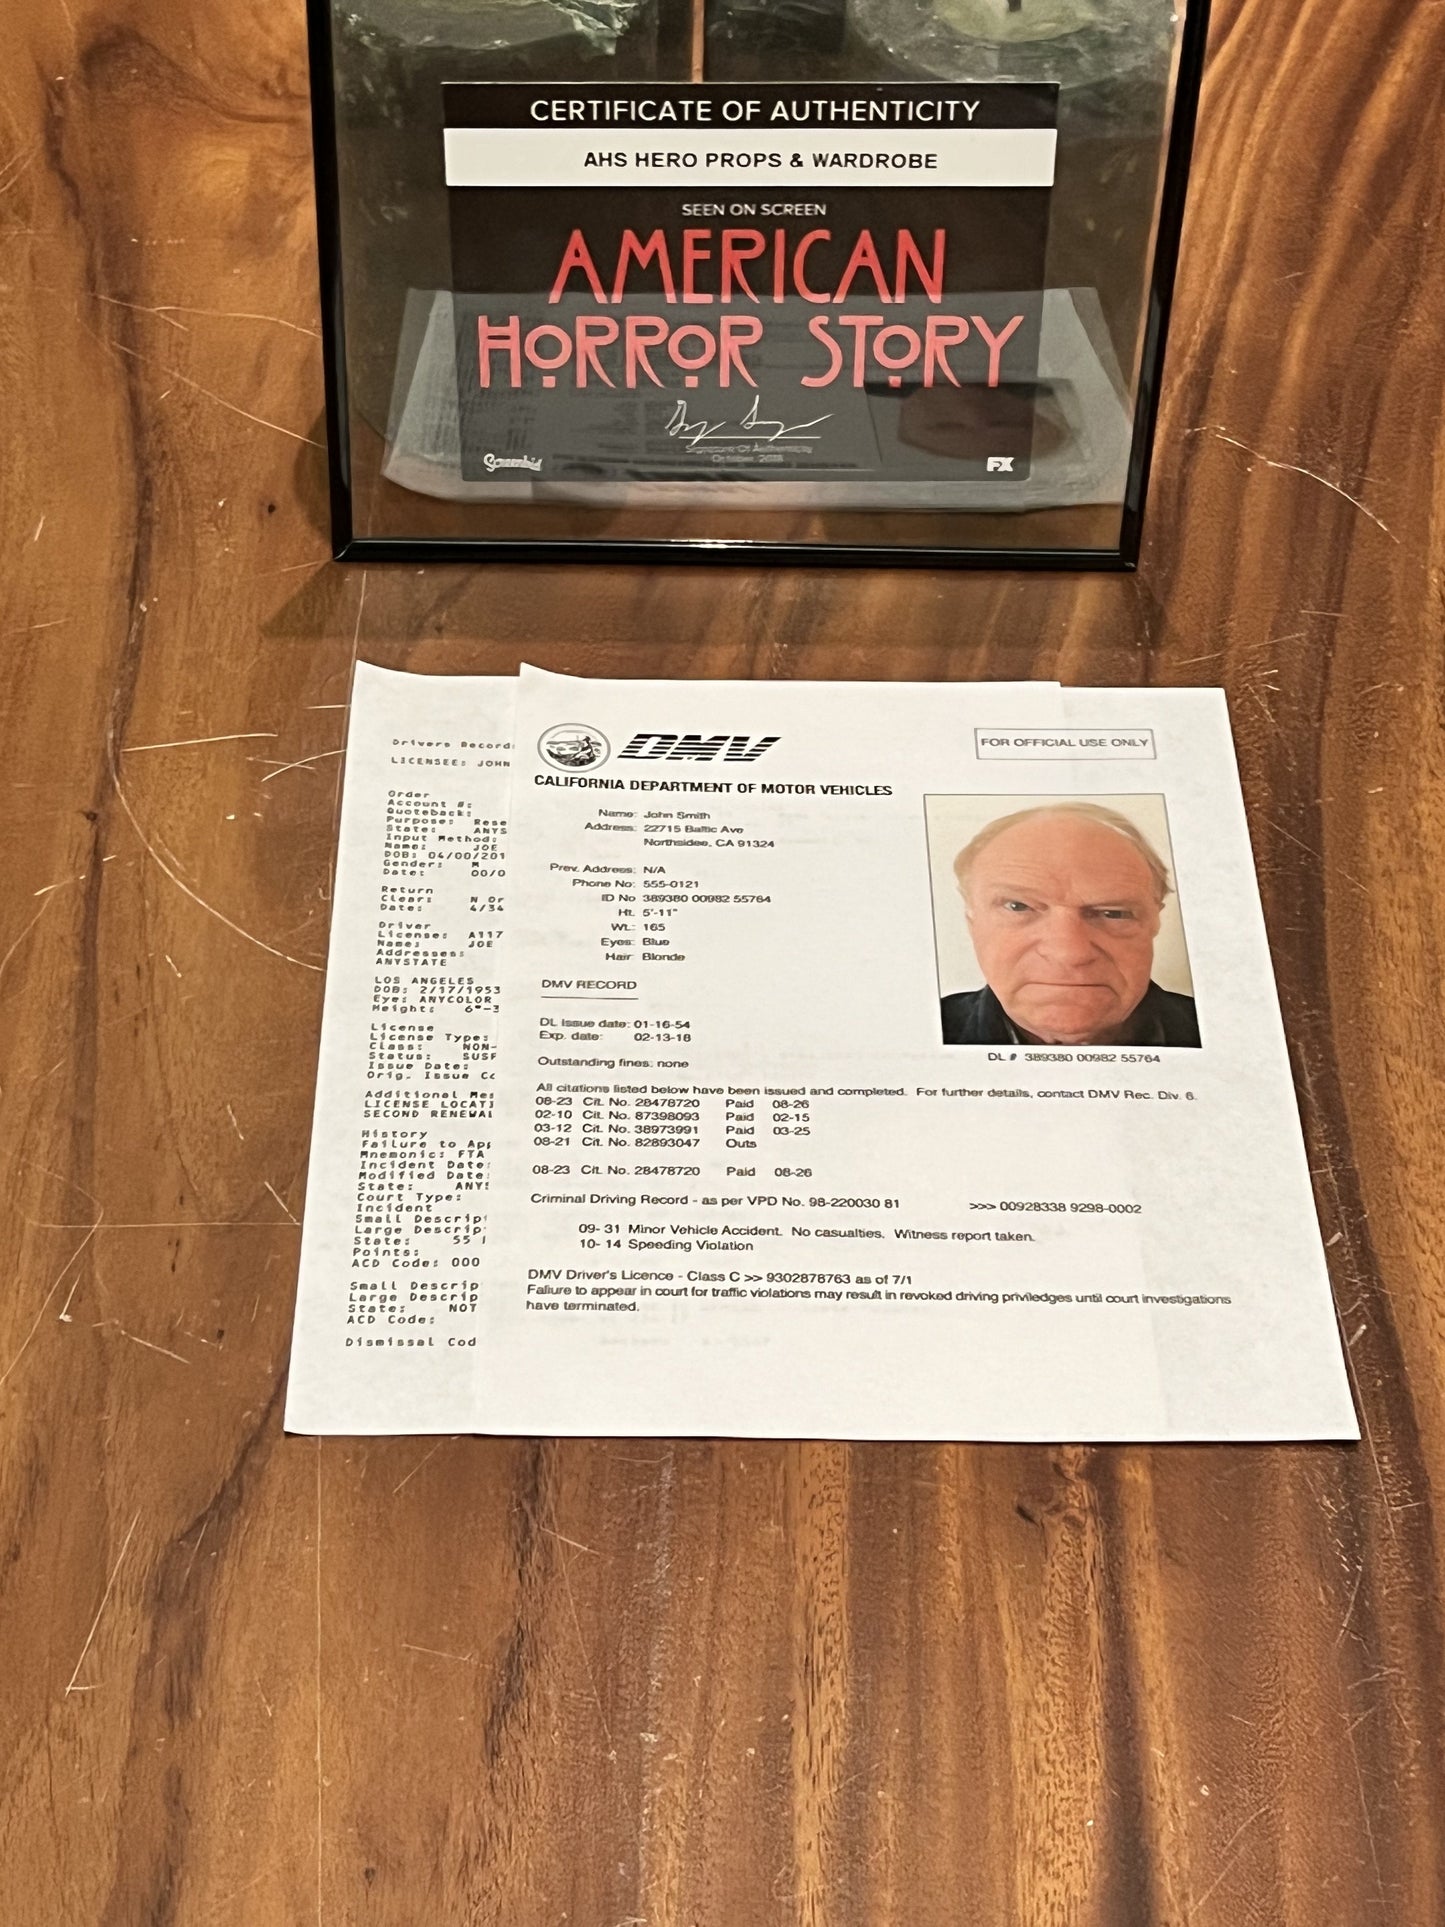 American Horror Story: HERO Prop Featured On Screen